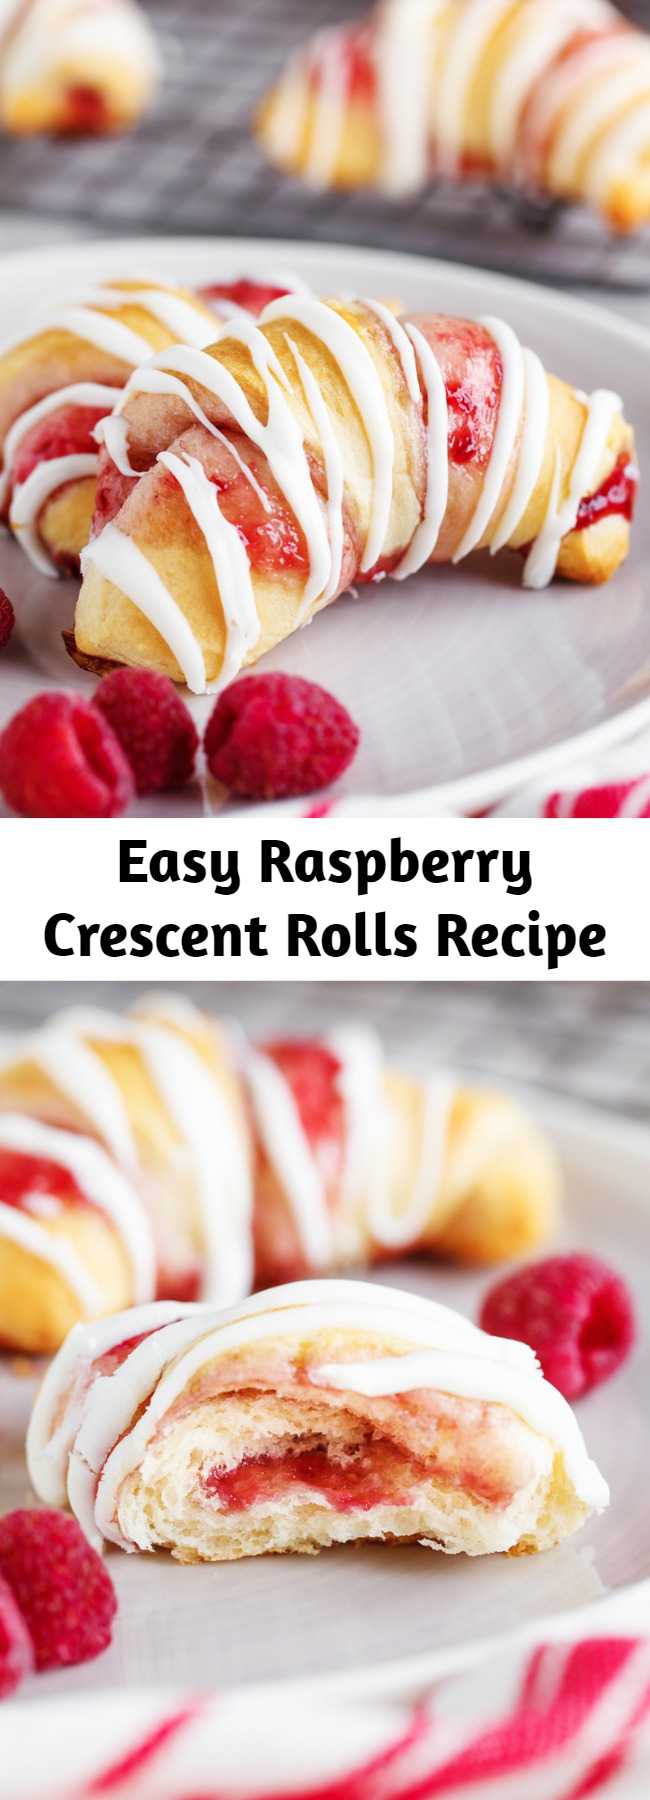 Easy Raspberry Crescent Rolls Recipe - Raspberry Crescent Rolls: a delicious sweet dessert that is quick to prepare and uses pre-made crescent rolls and delicious raspberry jam.